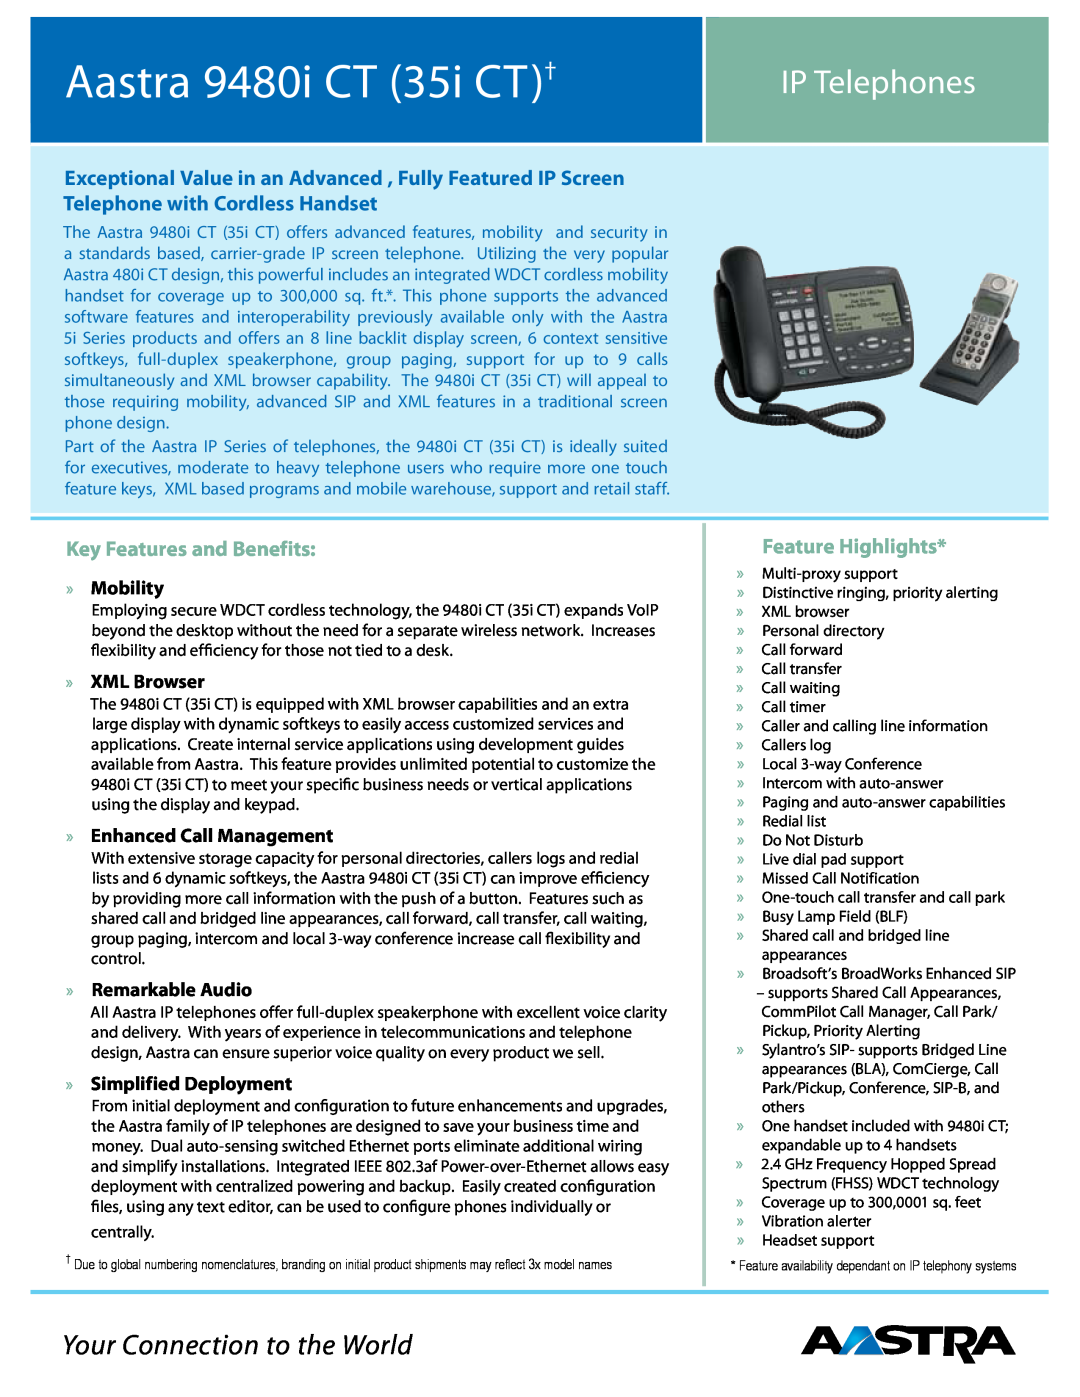 Aastra Telecom manual Aastra 9480i CT 35i CT†, IP Telephones, Your Connection to the World, Key Features and Benefits 